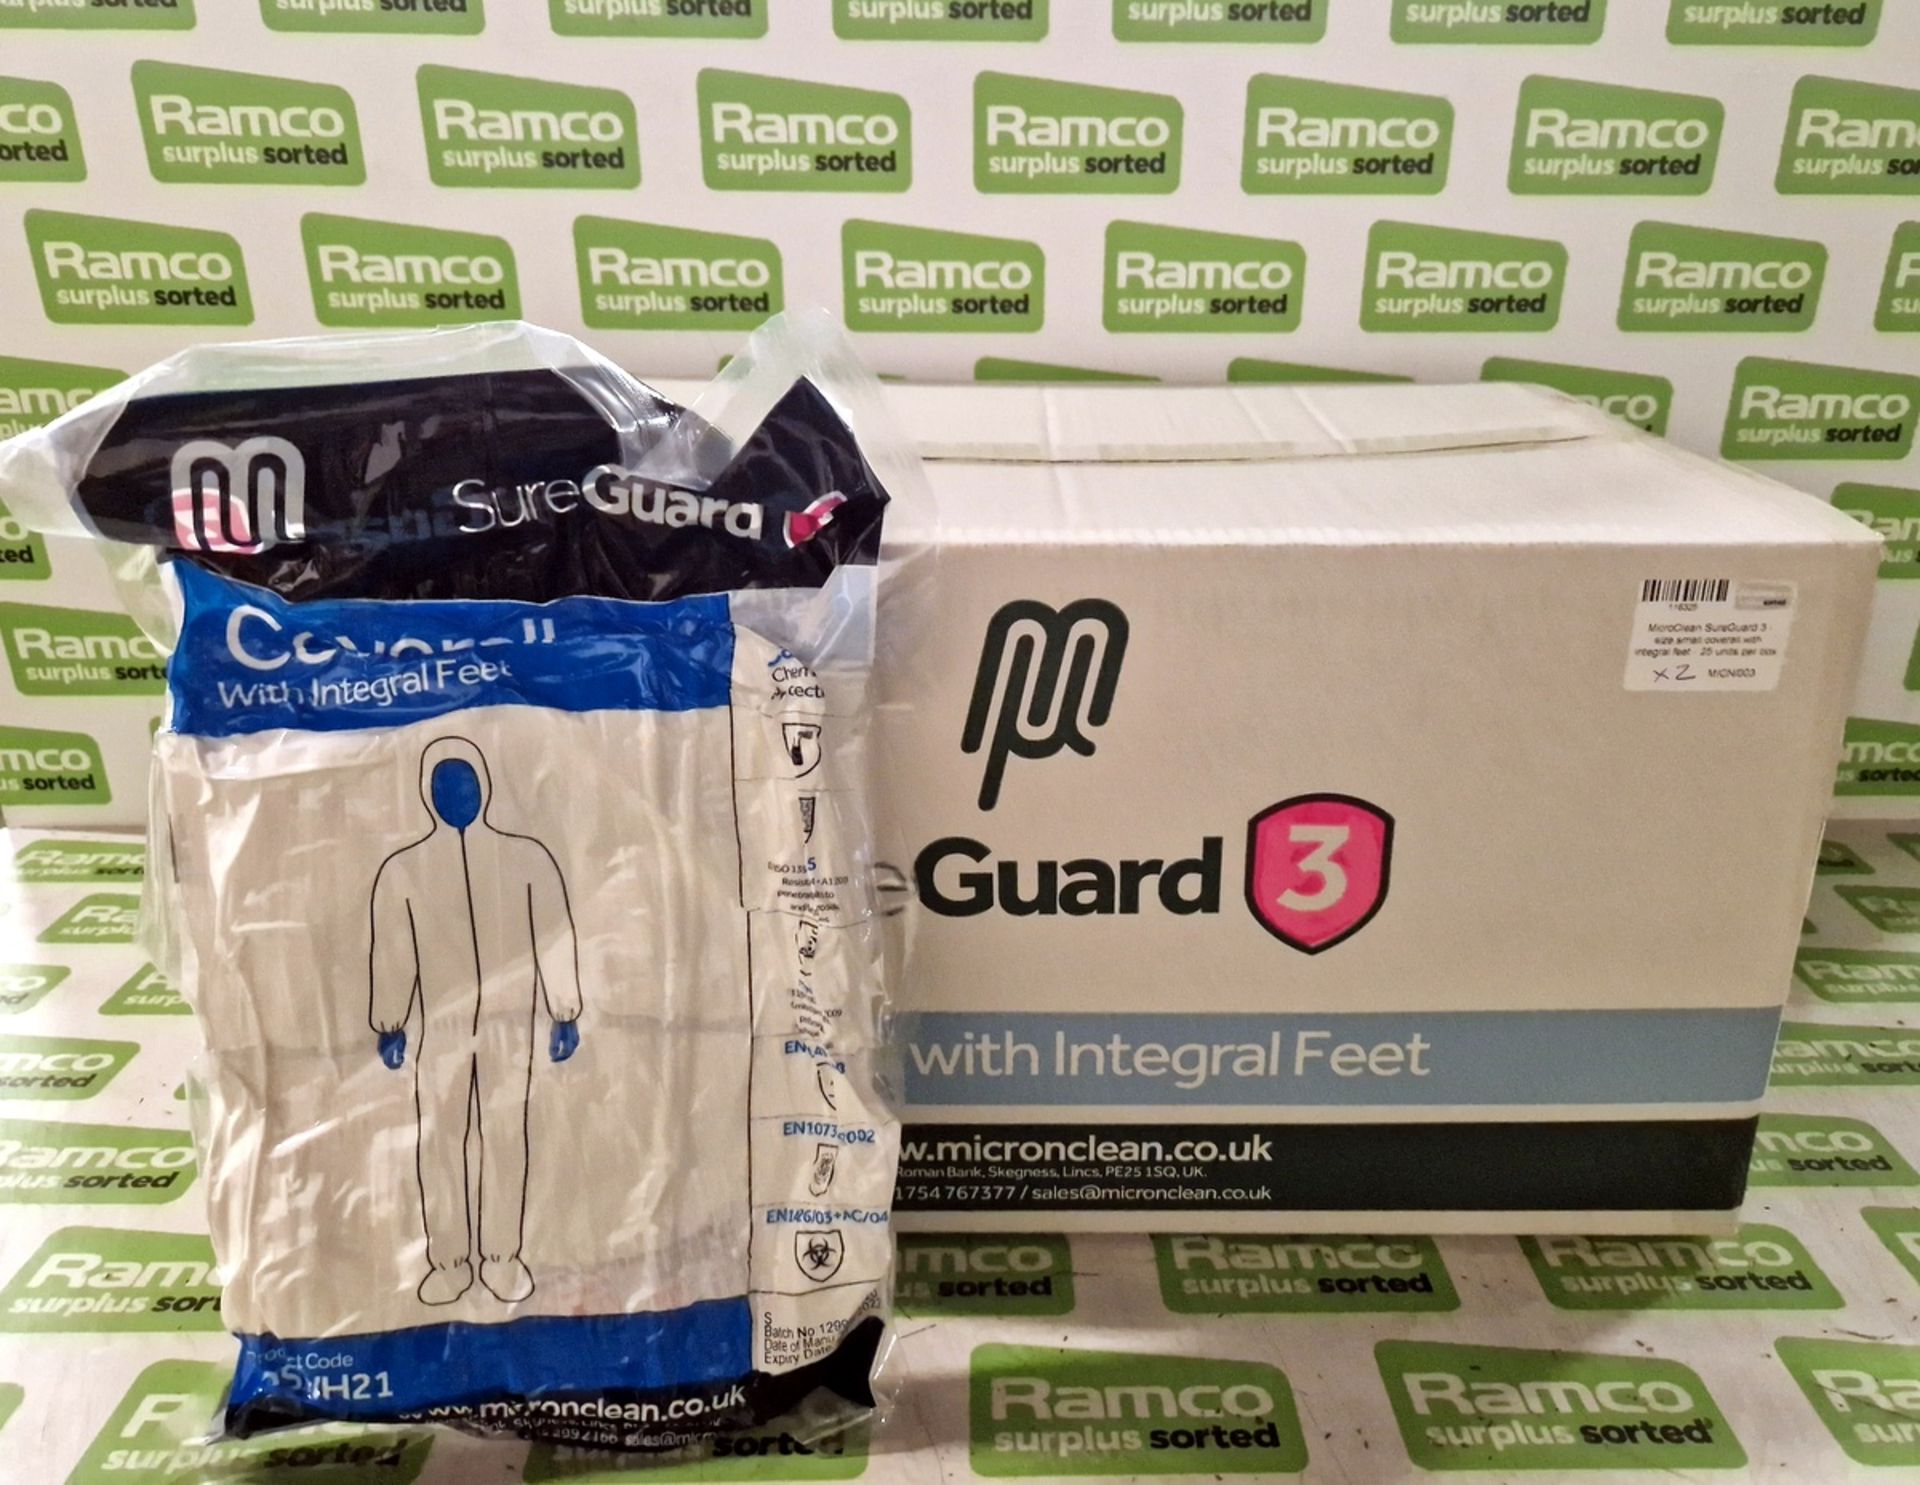 2x boxes of MicroClean SureGuard 3 coveralls with integral feet - size small - 25 units per box - Image 2 of 3